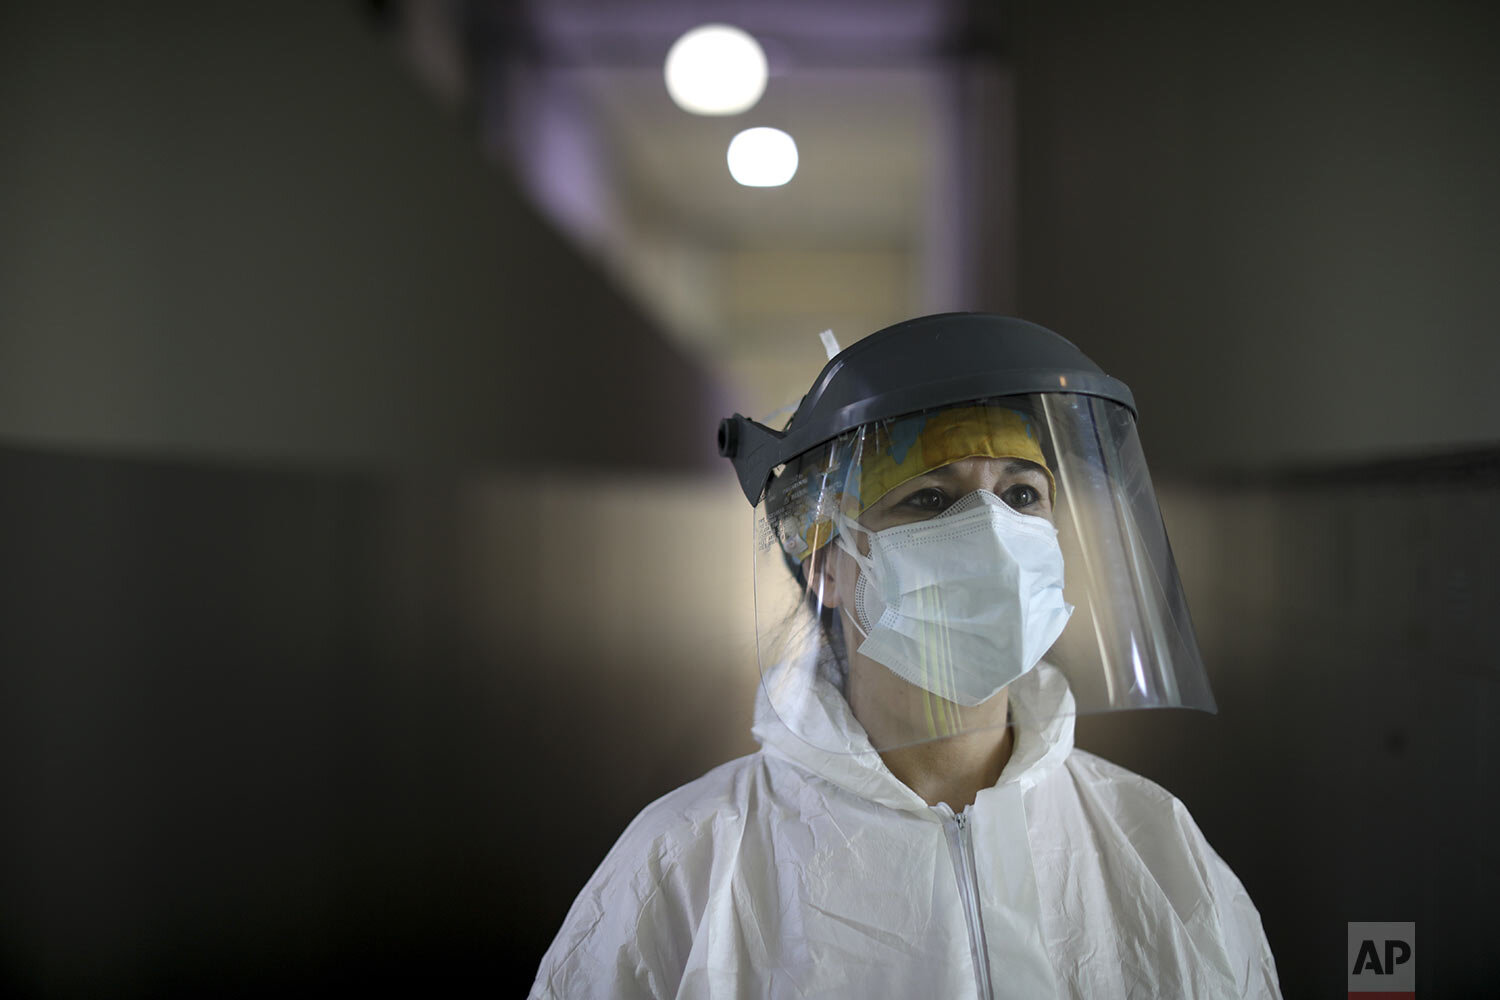  Andrea Cortes, a 49-year-old nurse, dressed in full protective gear, stands inside the Hospital Pineiro, in Buenos Aires, Argentina, Friday, July 17, 2020.  (AP Photo/Natacha Pisarenko) 